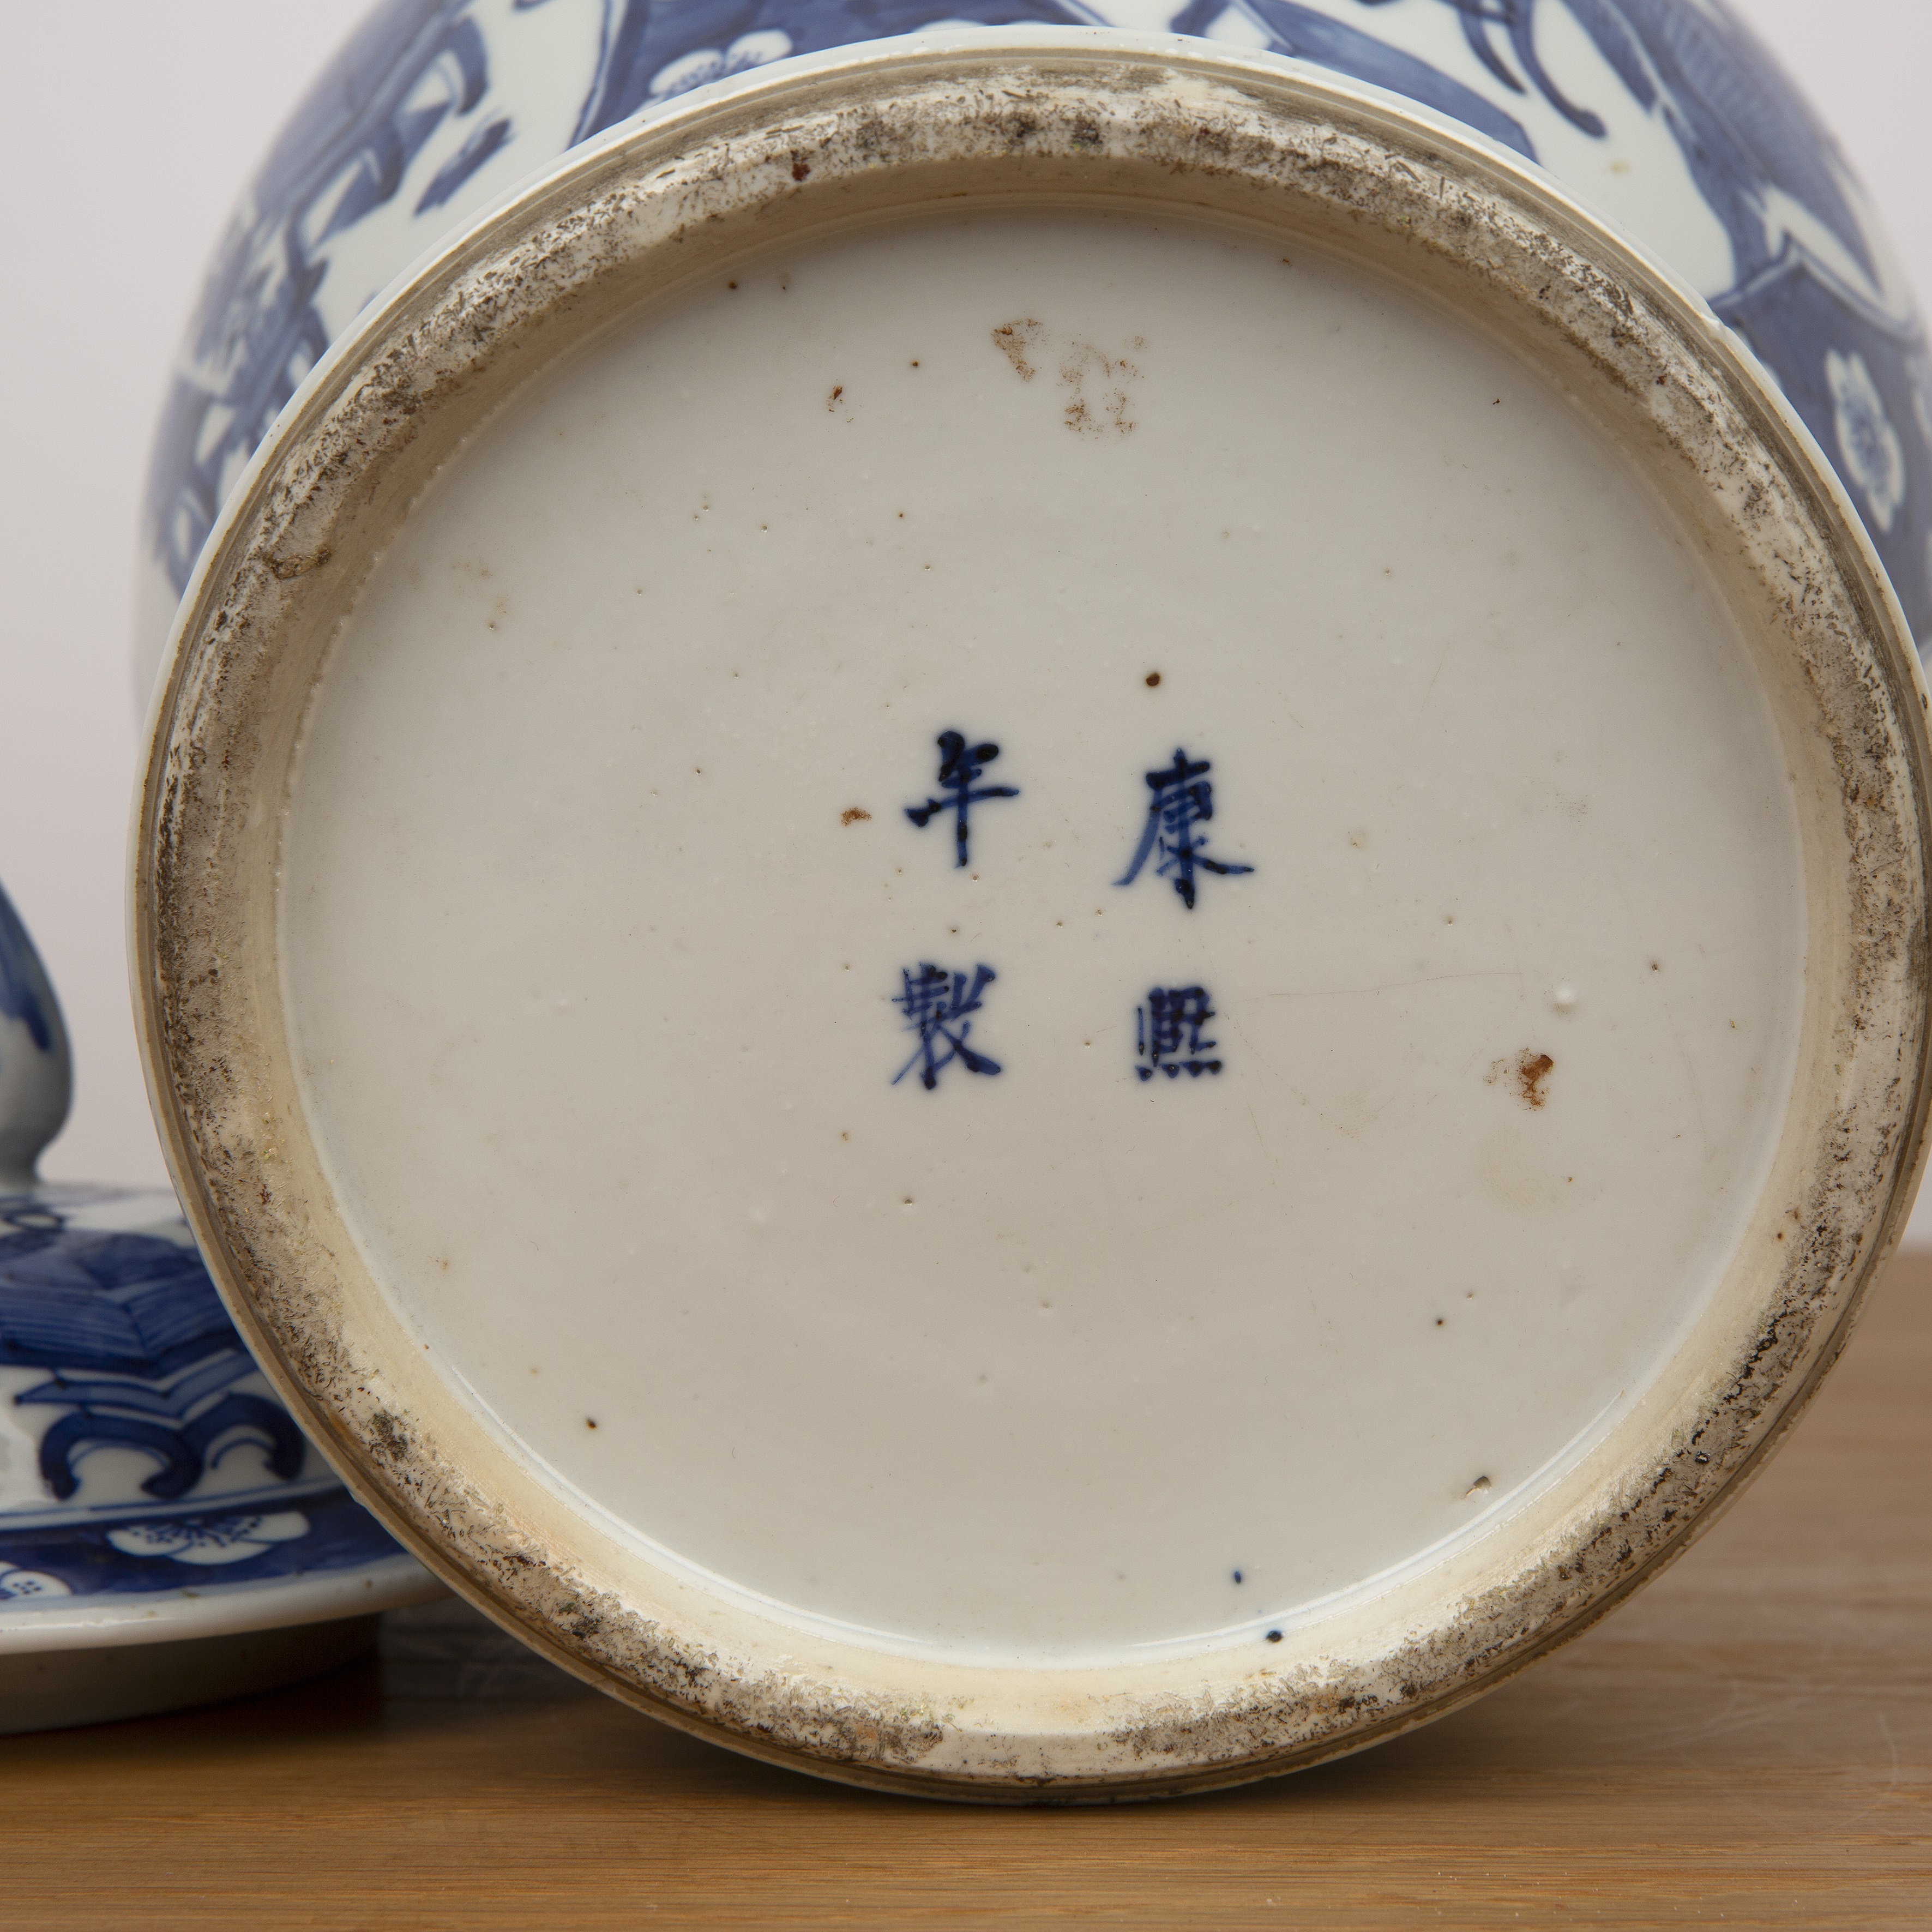 Blue and white porcelain vase and cover Chinese, 19th Century painted with panels of 'antiques' - Image 6 of 7